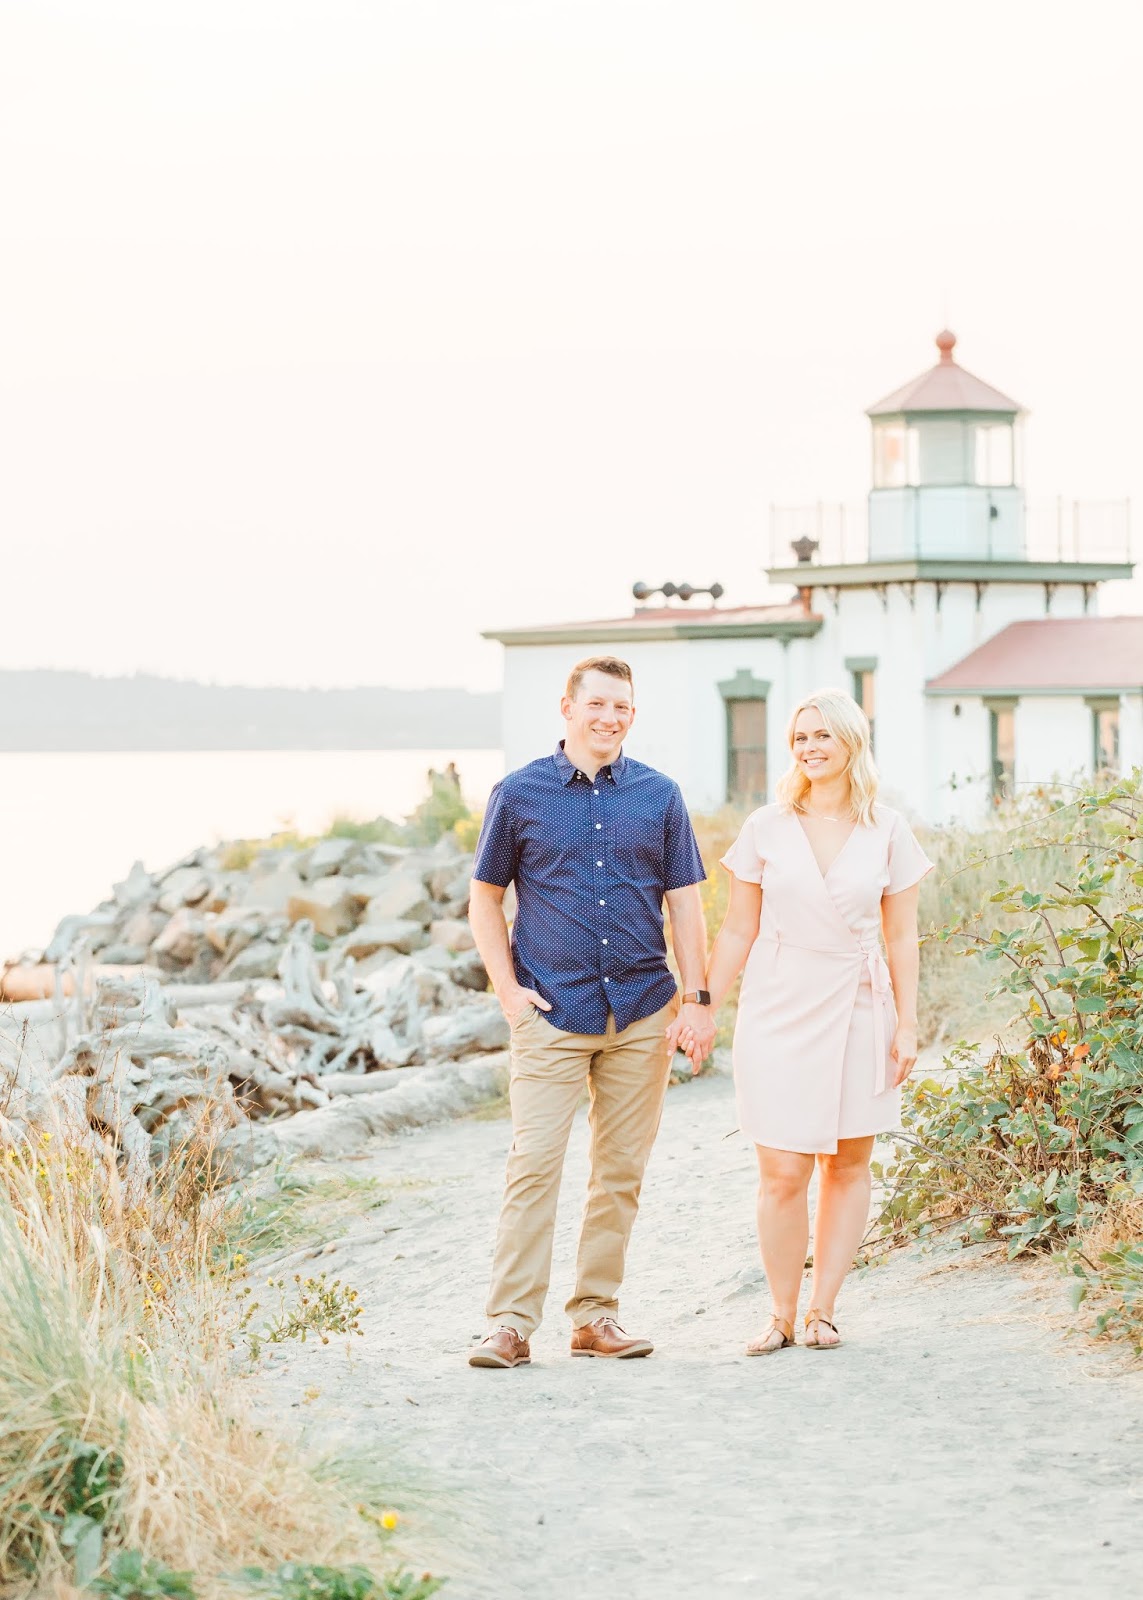 Discovery Park Engagement Session-Seattle Engagement Photographers-Something Minted Photography